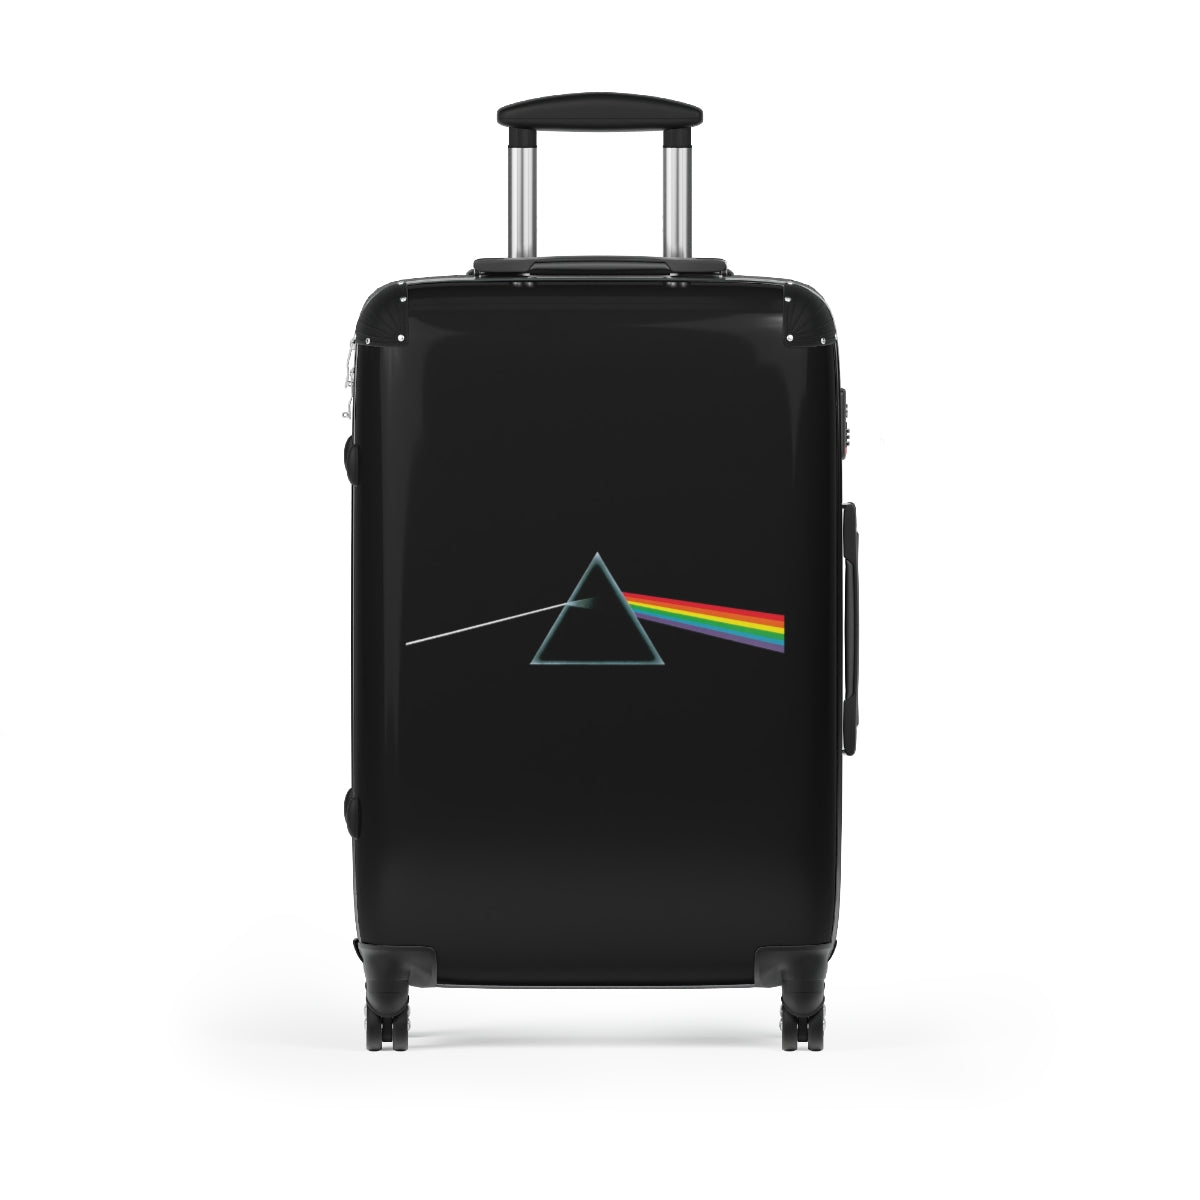 Getrott Pink Floyd Album Cover Black Cabin Suitcase Inner Pockets Extended Storage Adjustable Telescopic Handle Inner Pockets Double wheeled Polycarbonate Hard-shell Built-in Lock